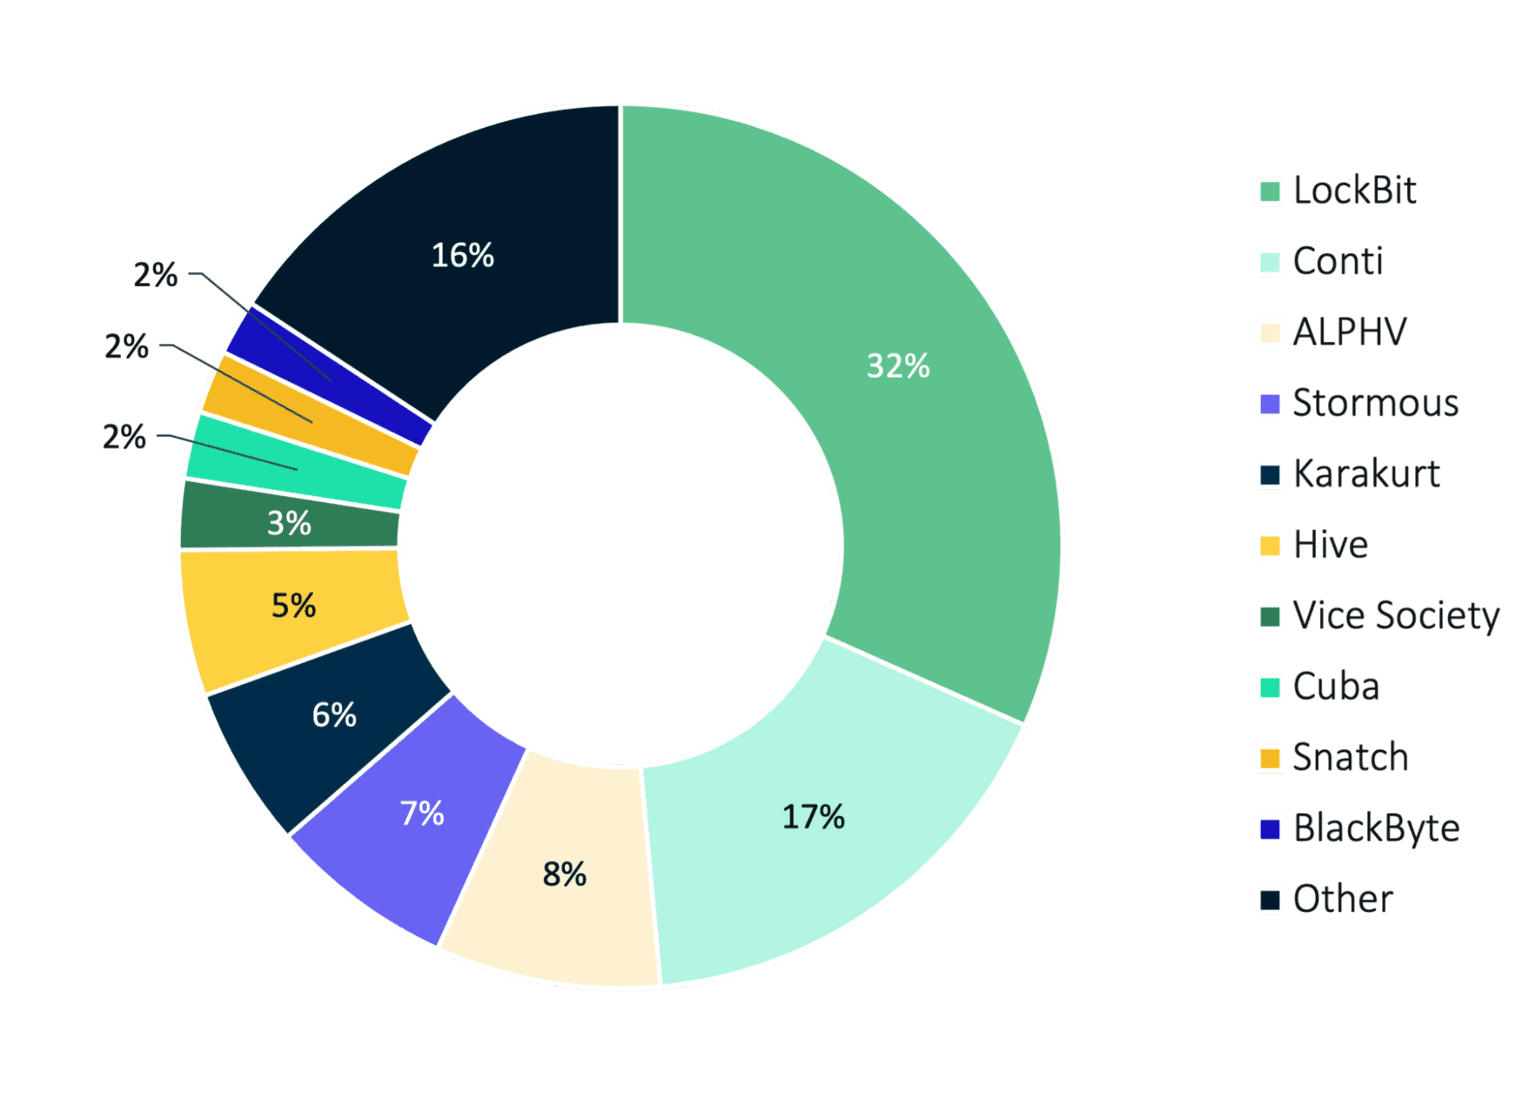 Q1 20221 Distribution of Ransomware Attacks by Group